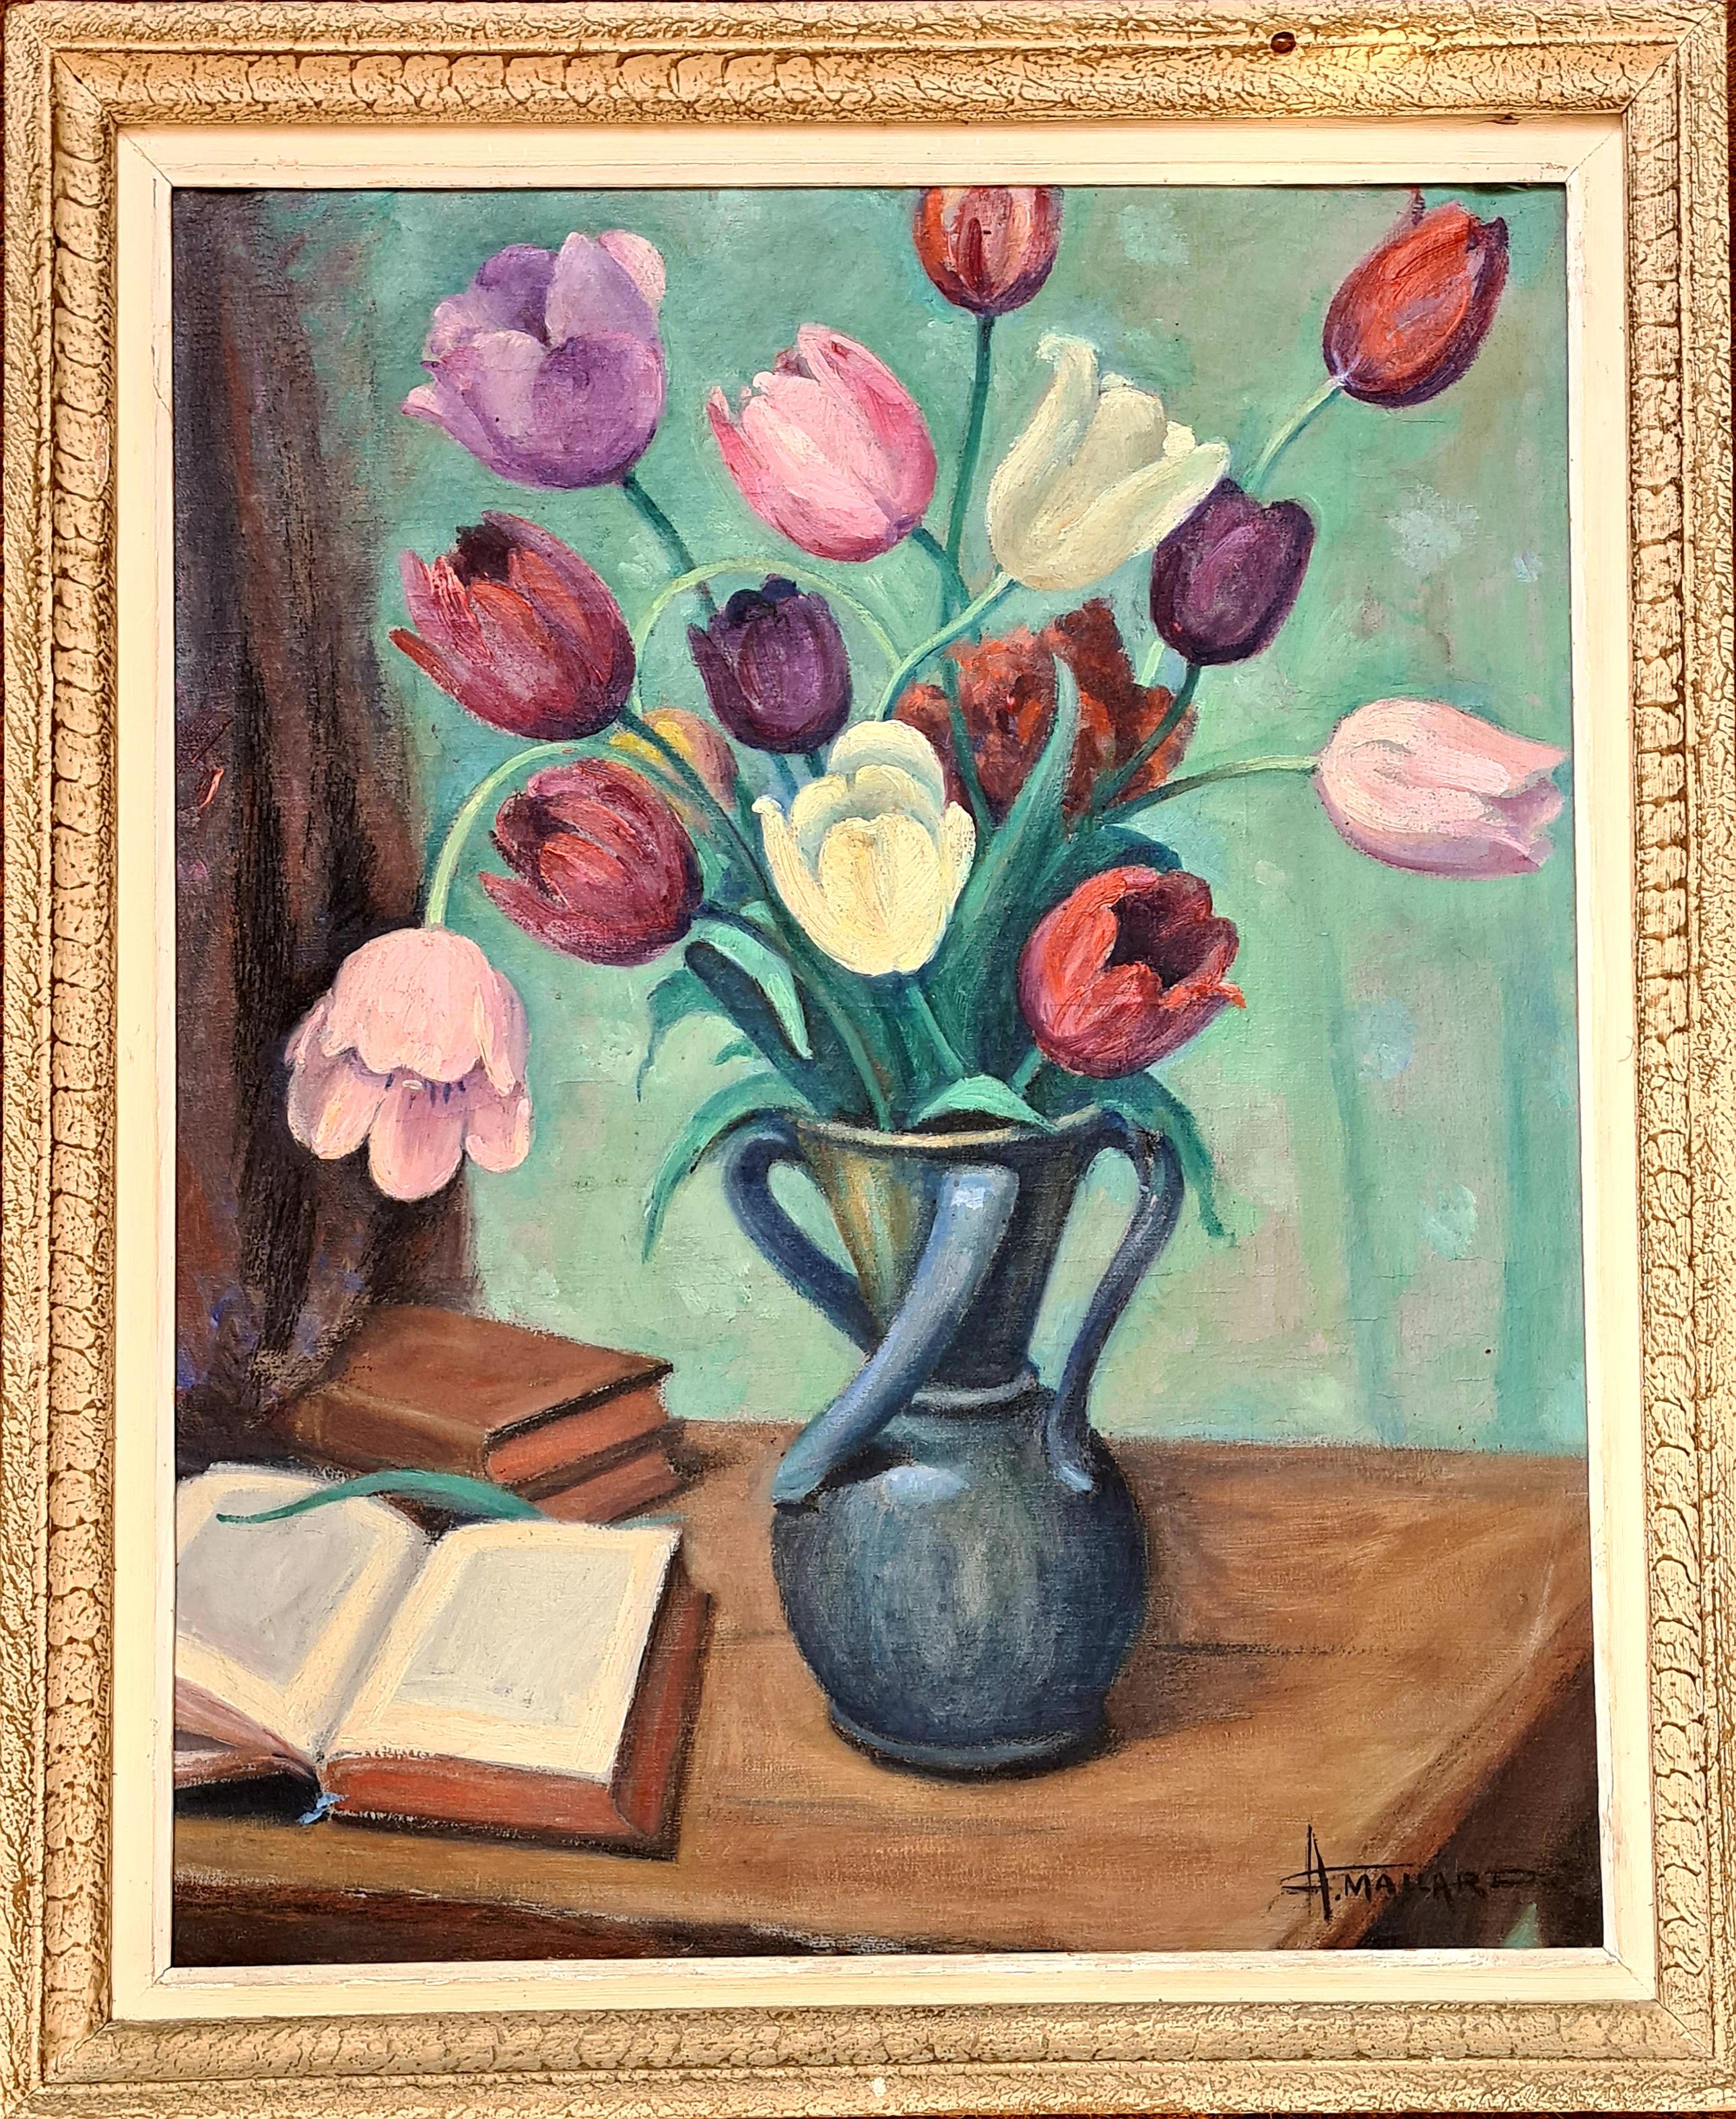 The Tulips, Art Deco Still Life on Canvas of Tulips in a Vase in an Interior